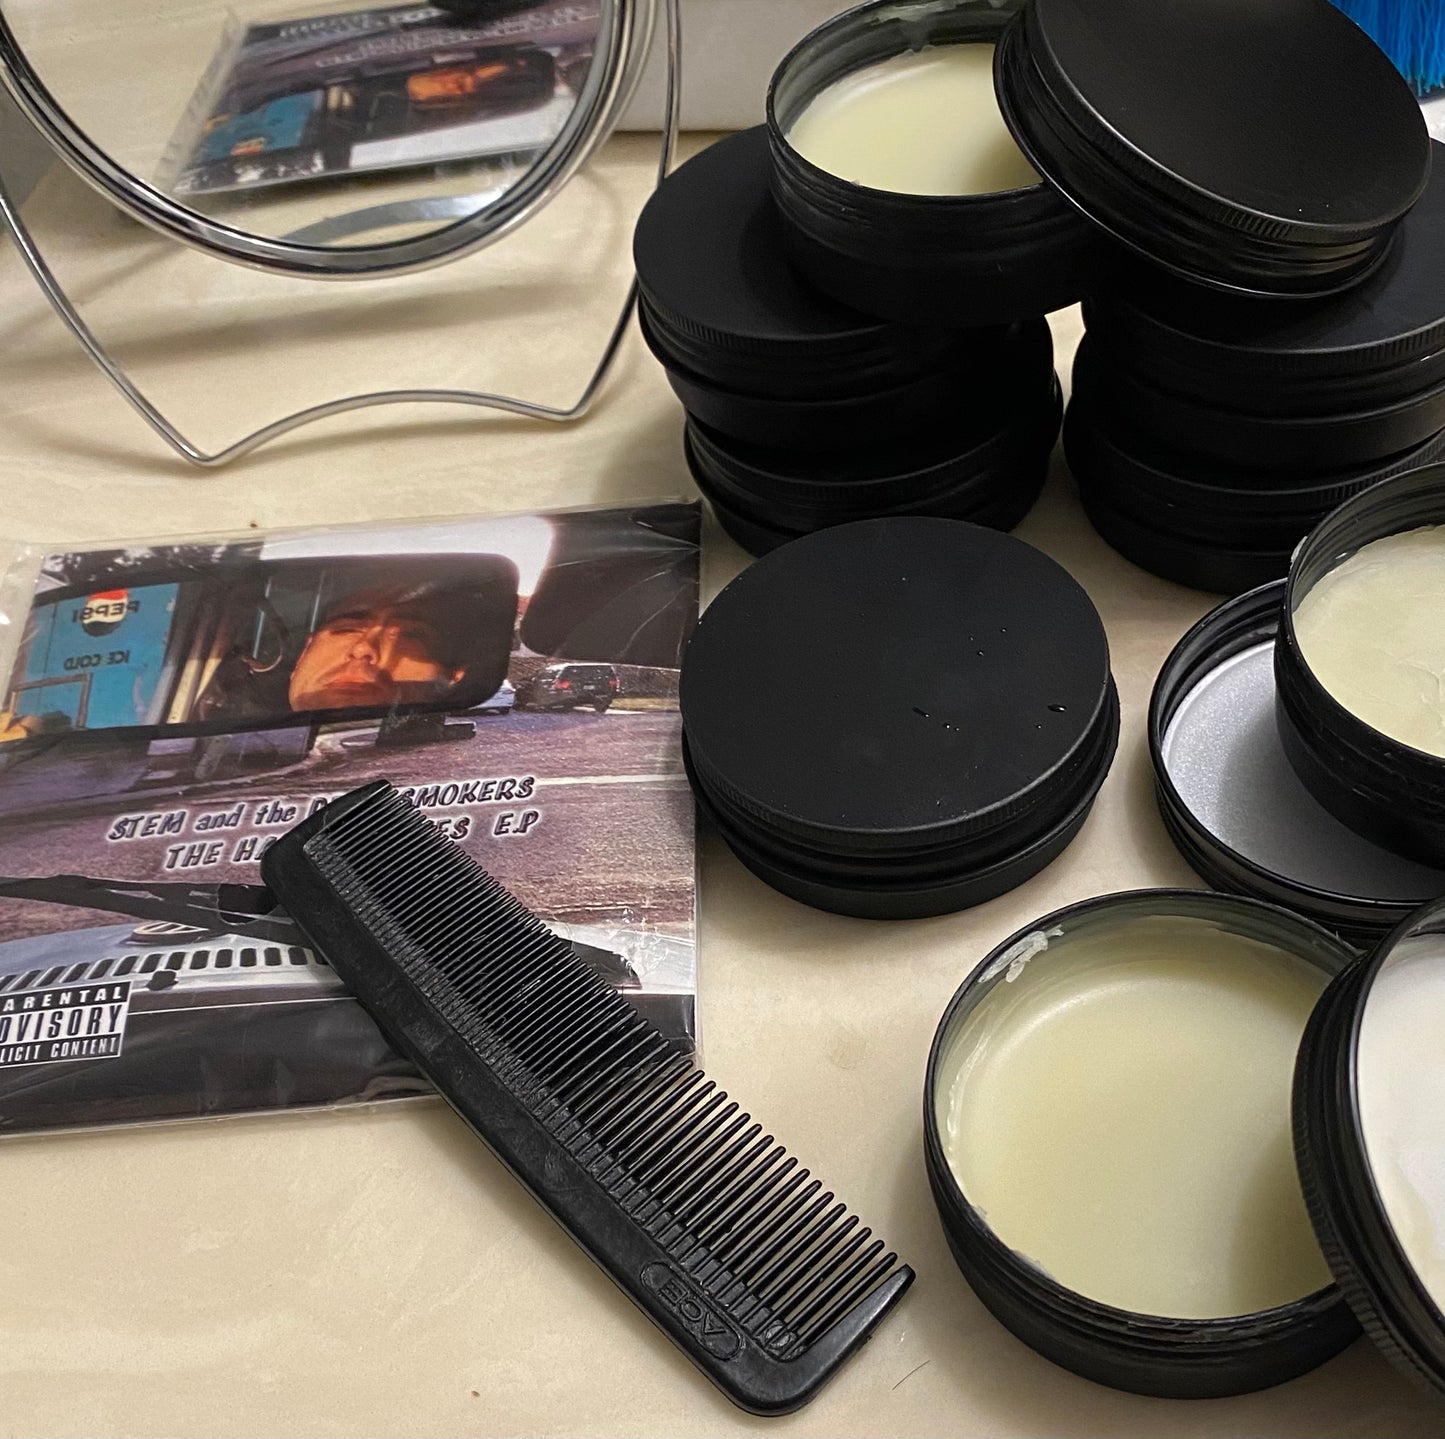 Stem’s Pomade Hairstyling Grease